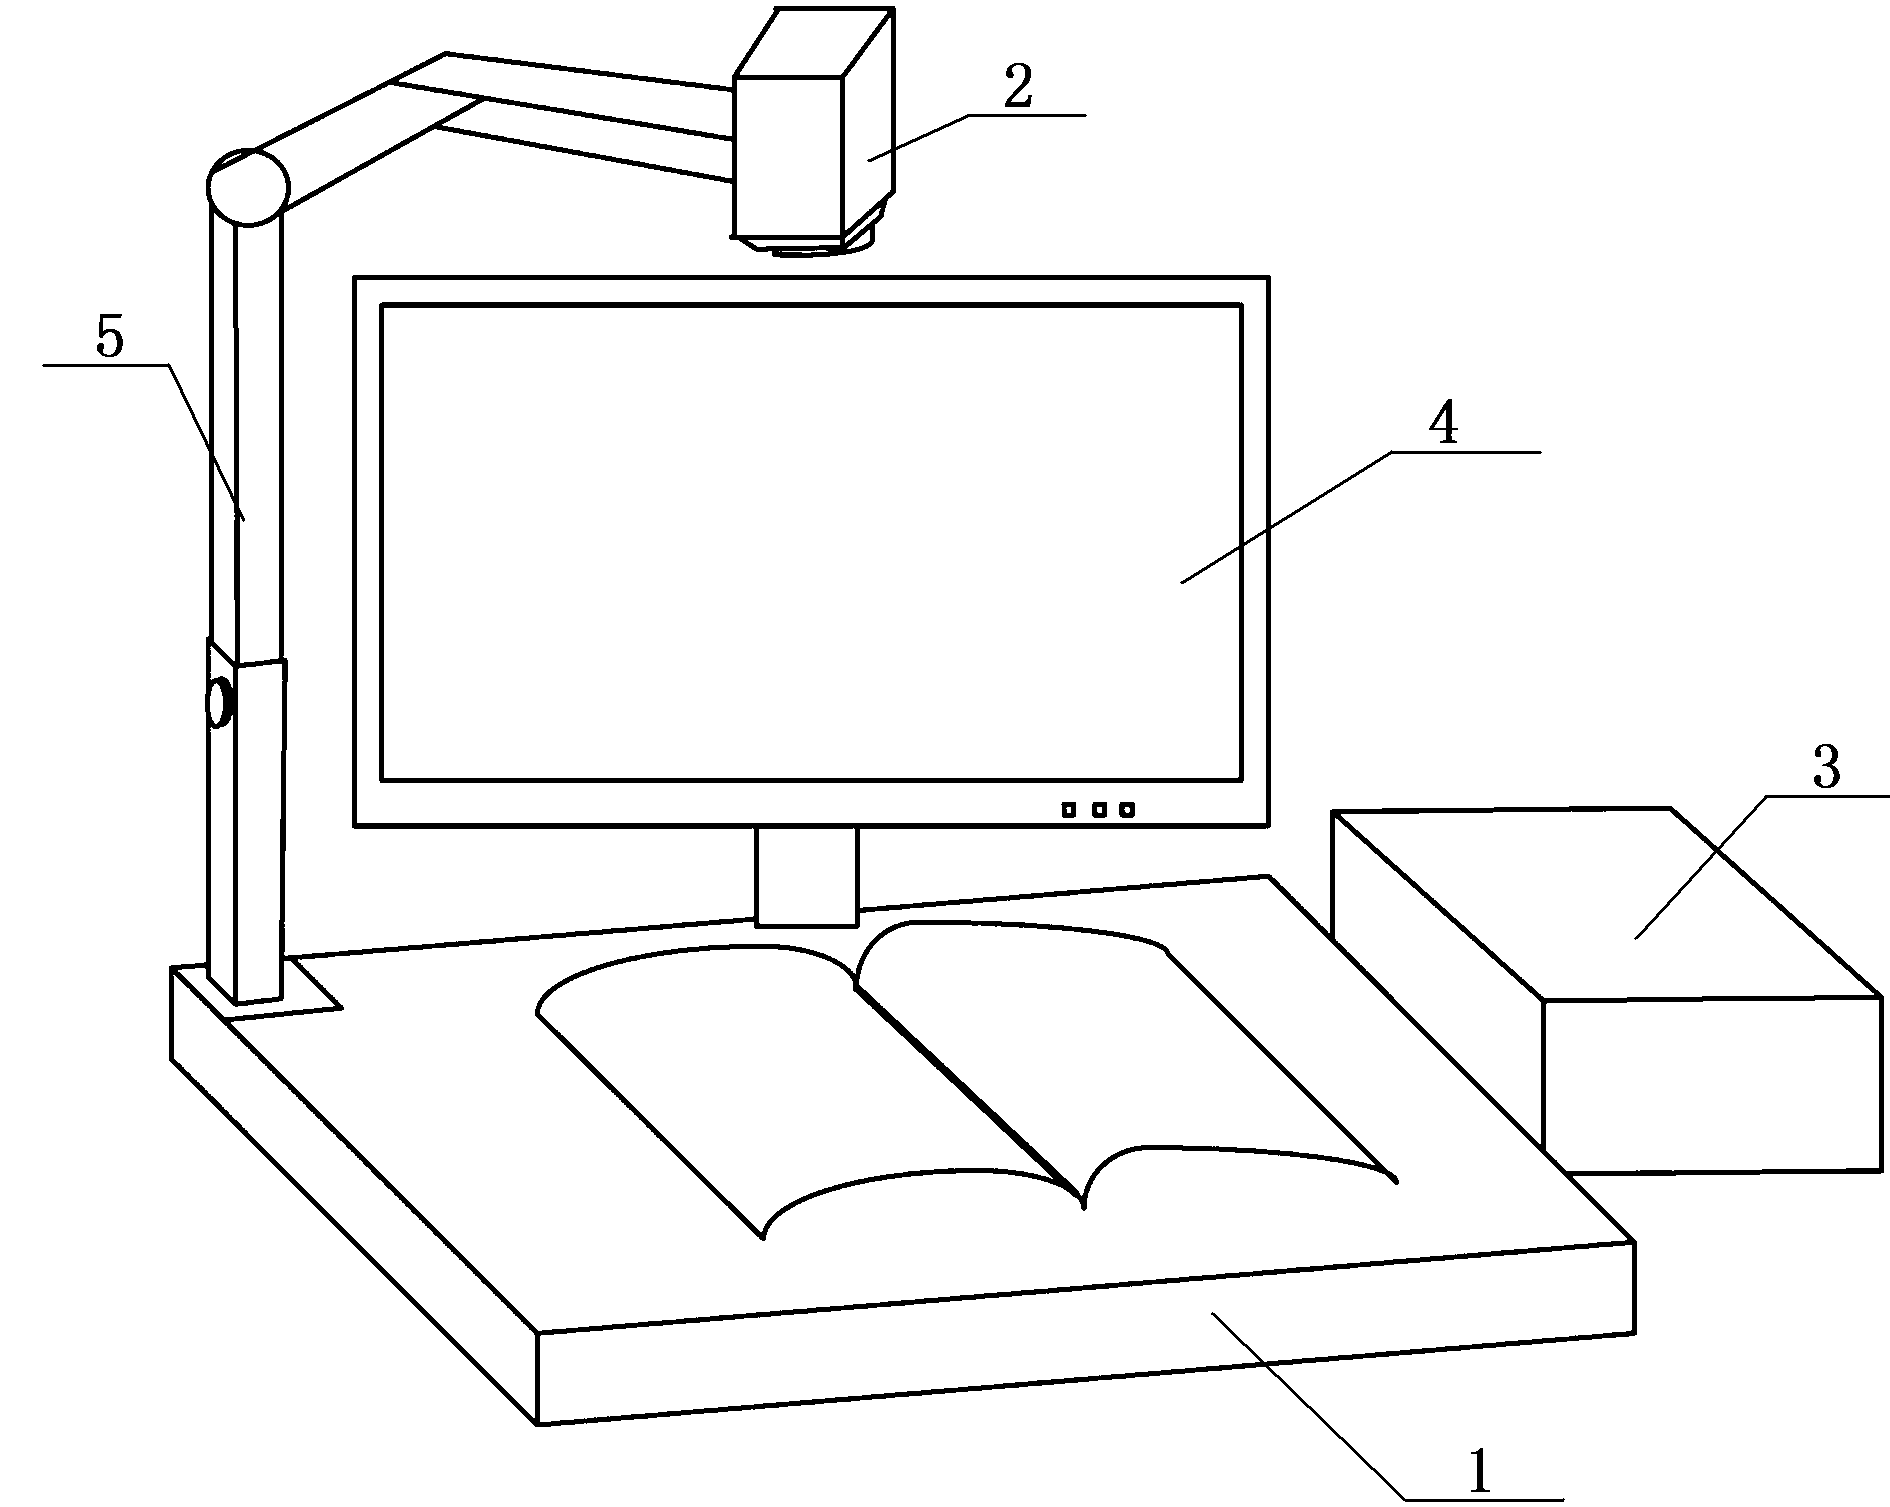 Continuous video image processing scanner and scanning method for paper documents